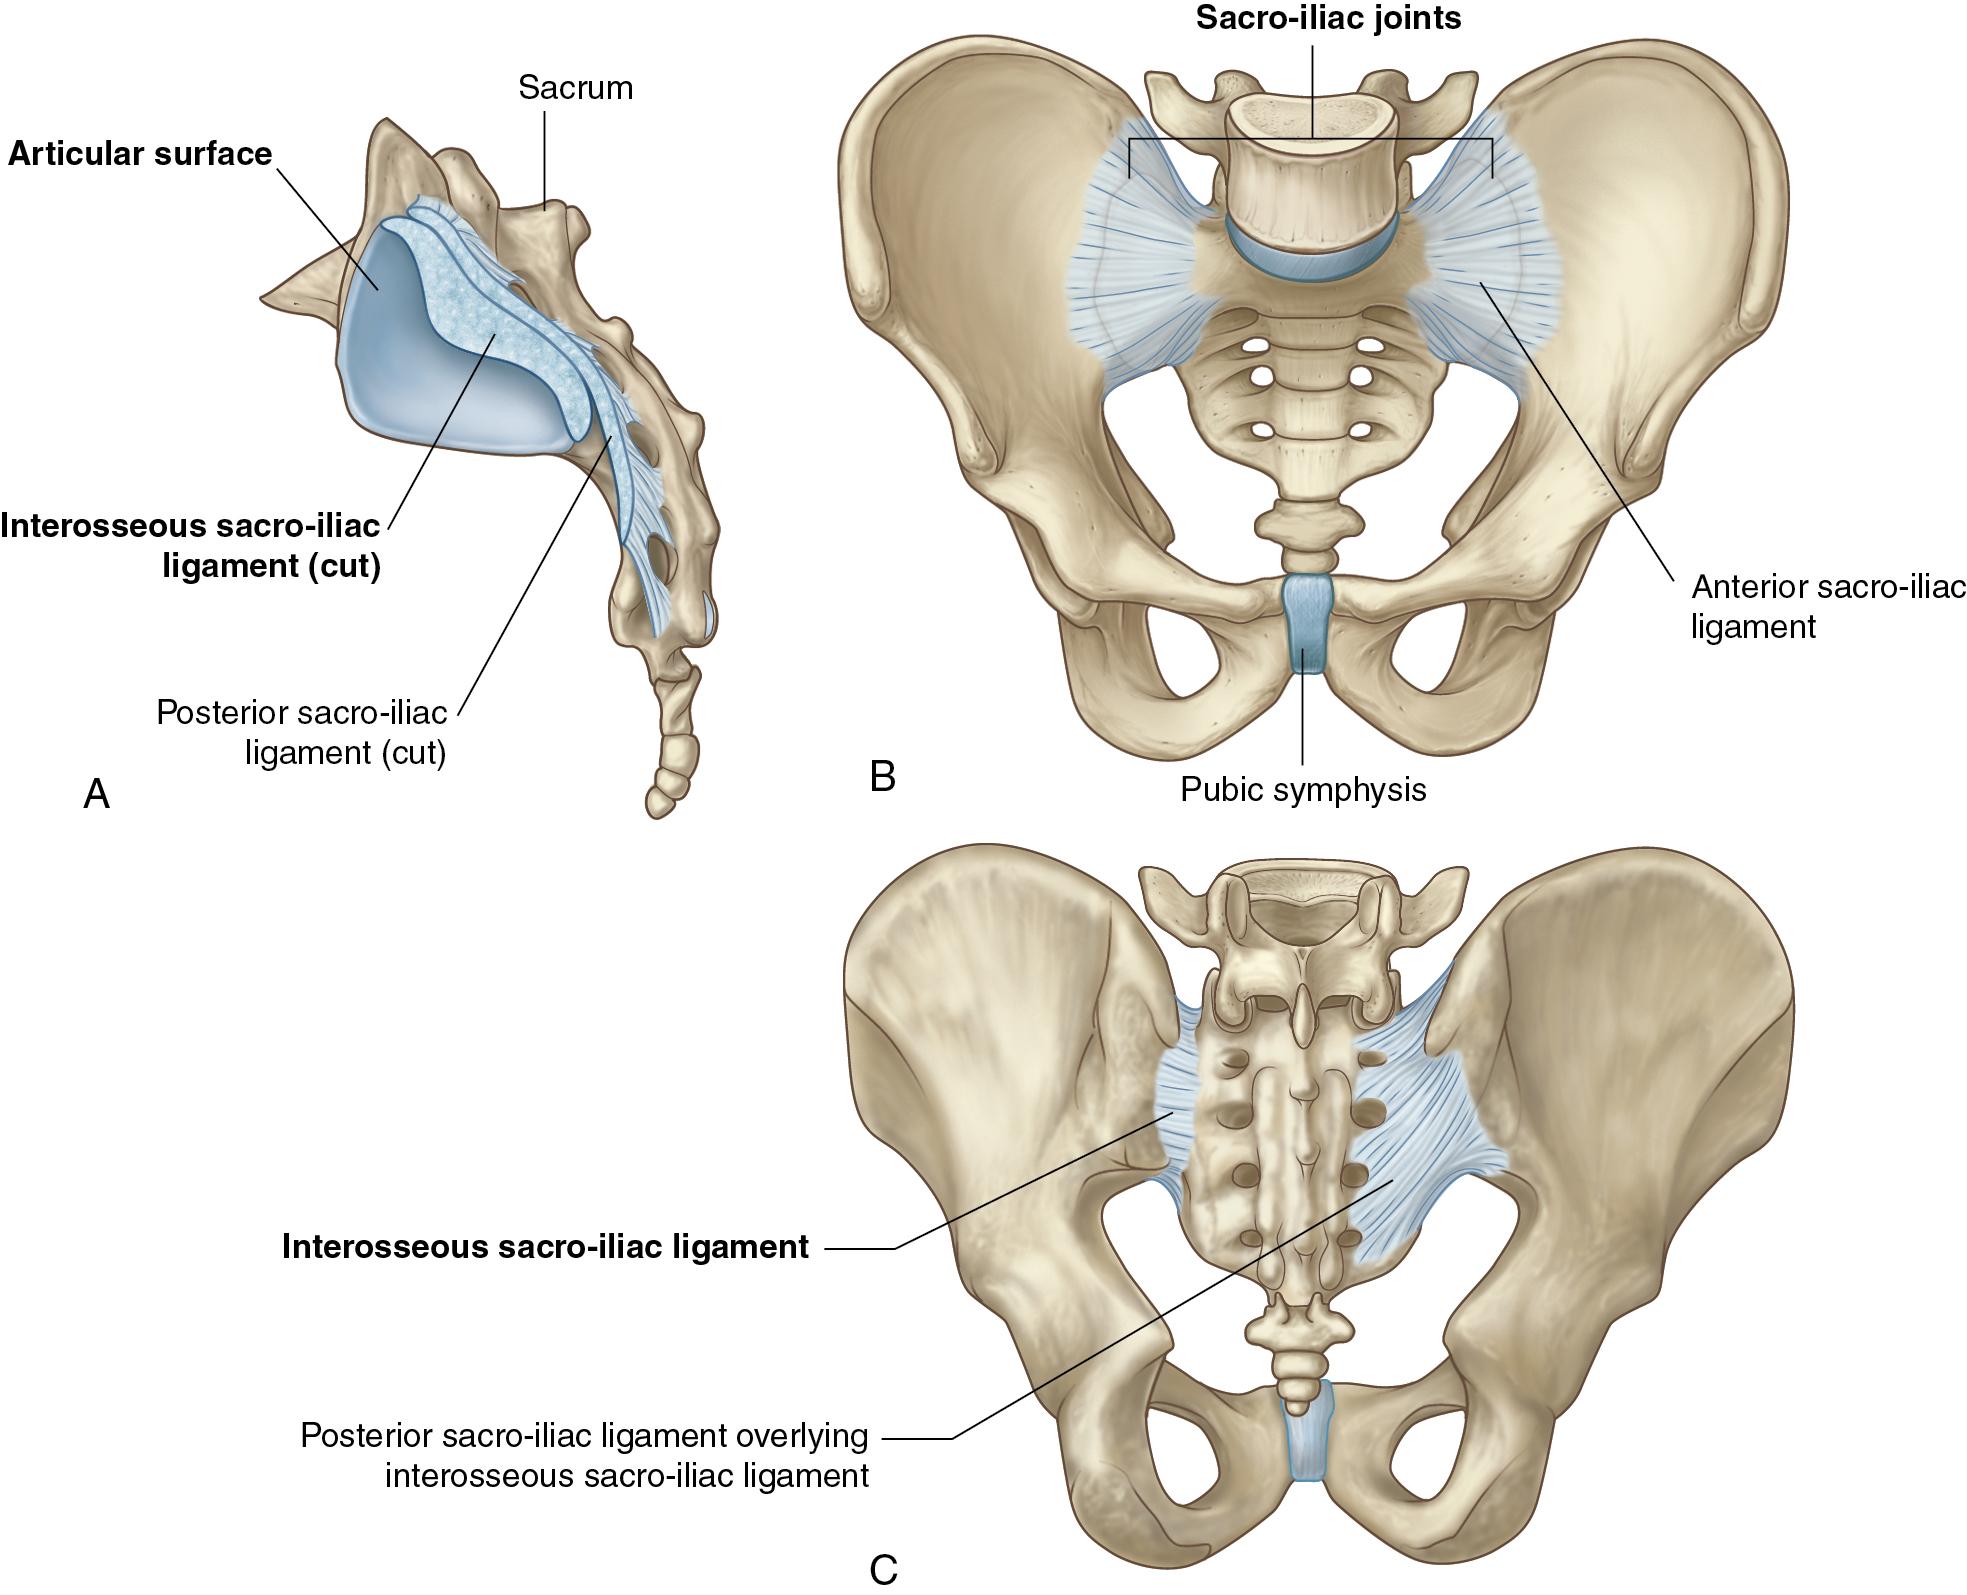 Fig. 50.1, Sacroiliac joints and associated ligaments.